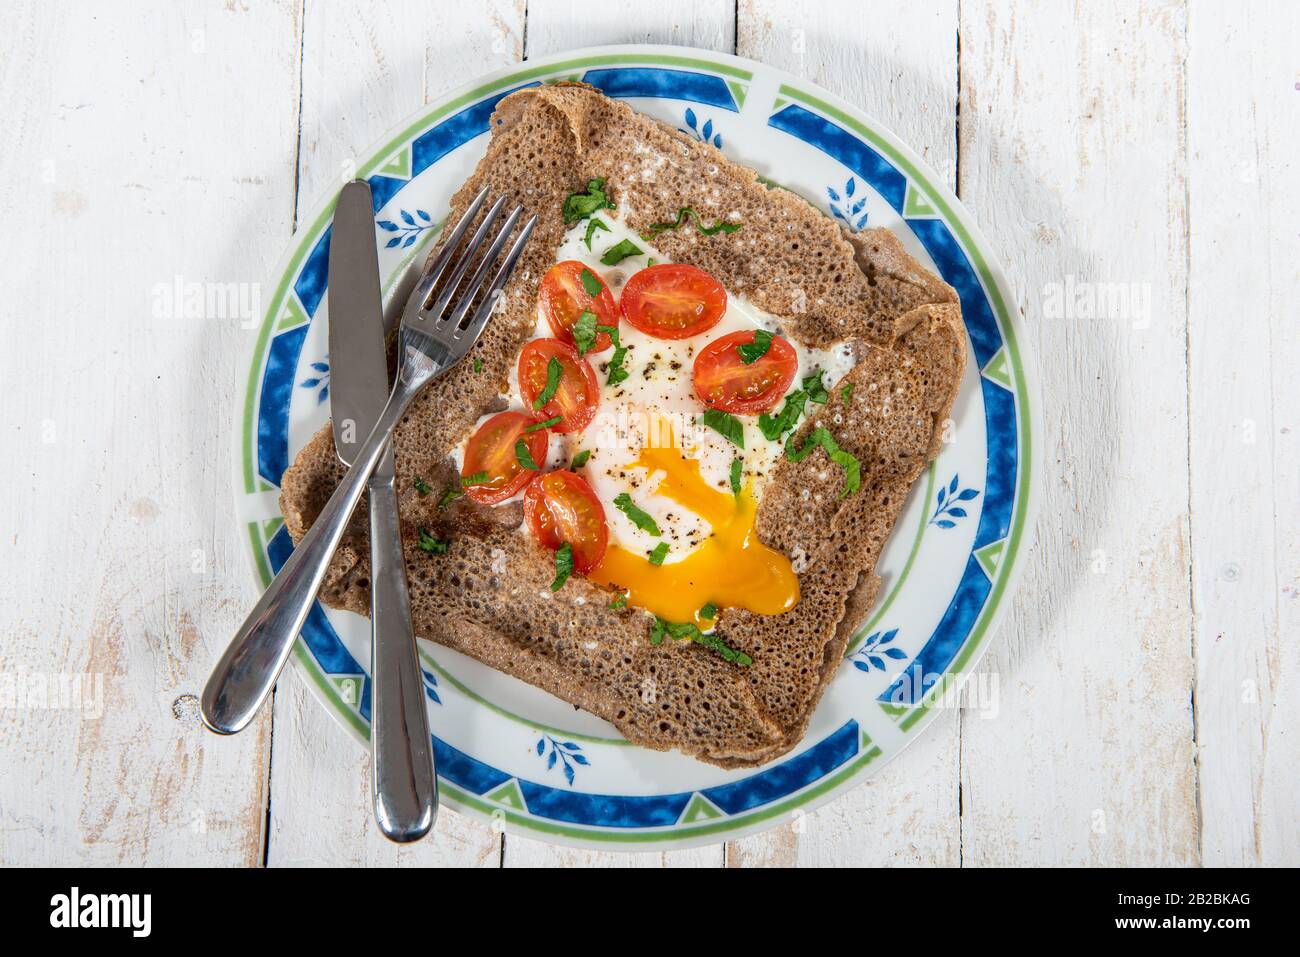 aa Breton crepe with egg and tomatoes Stock Photo